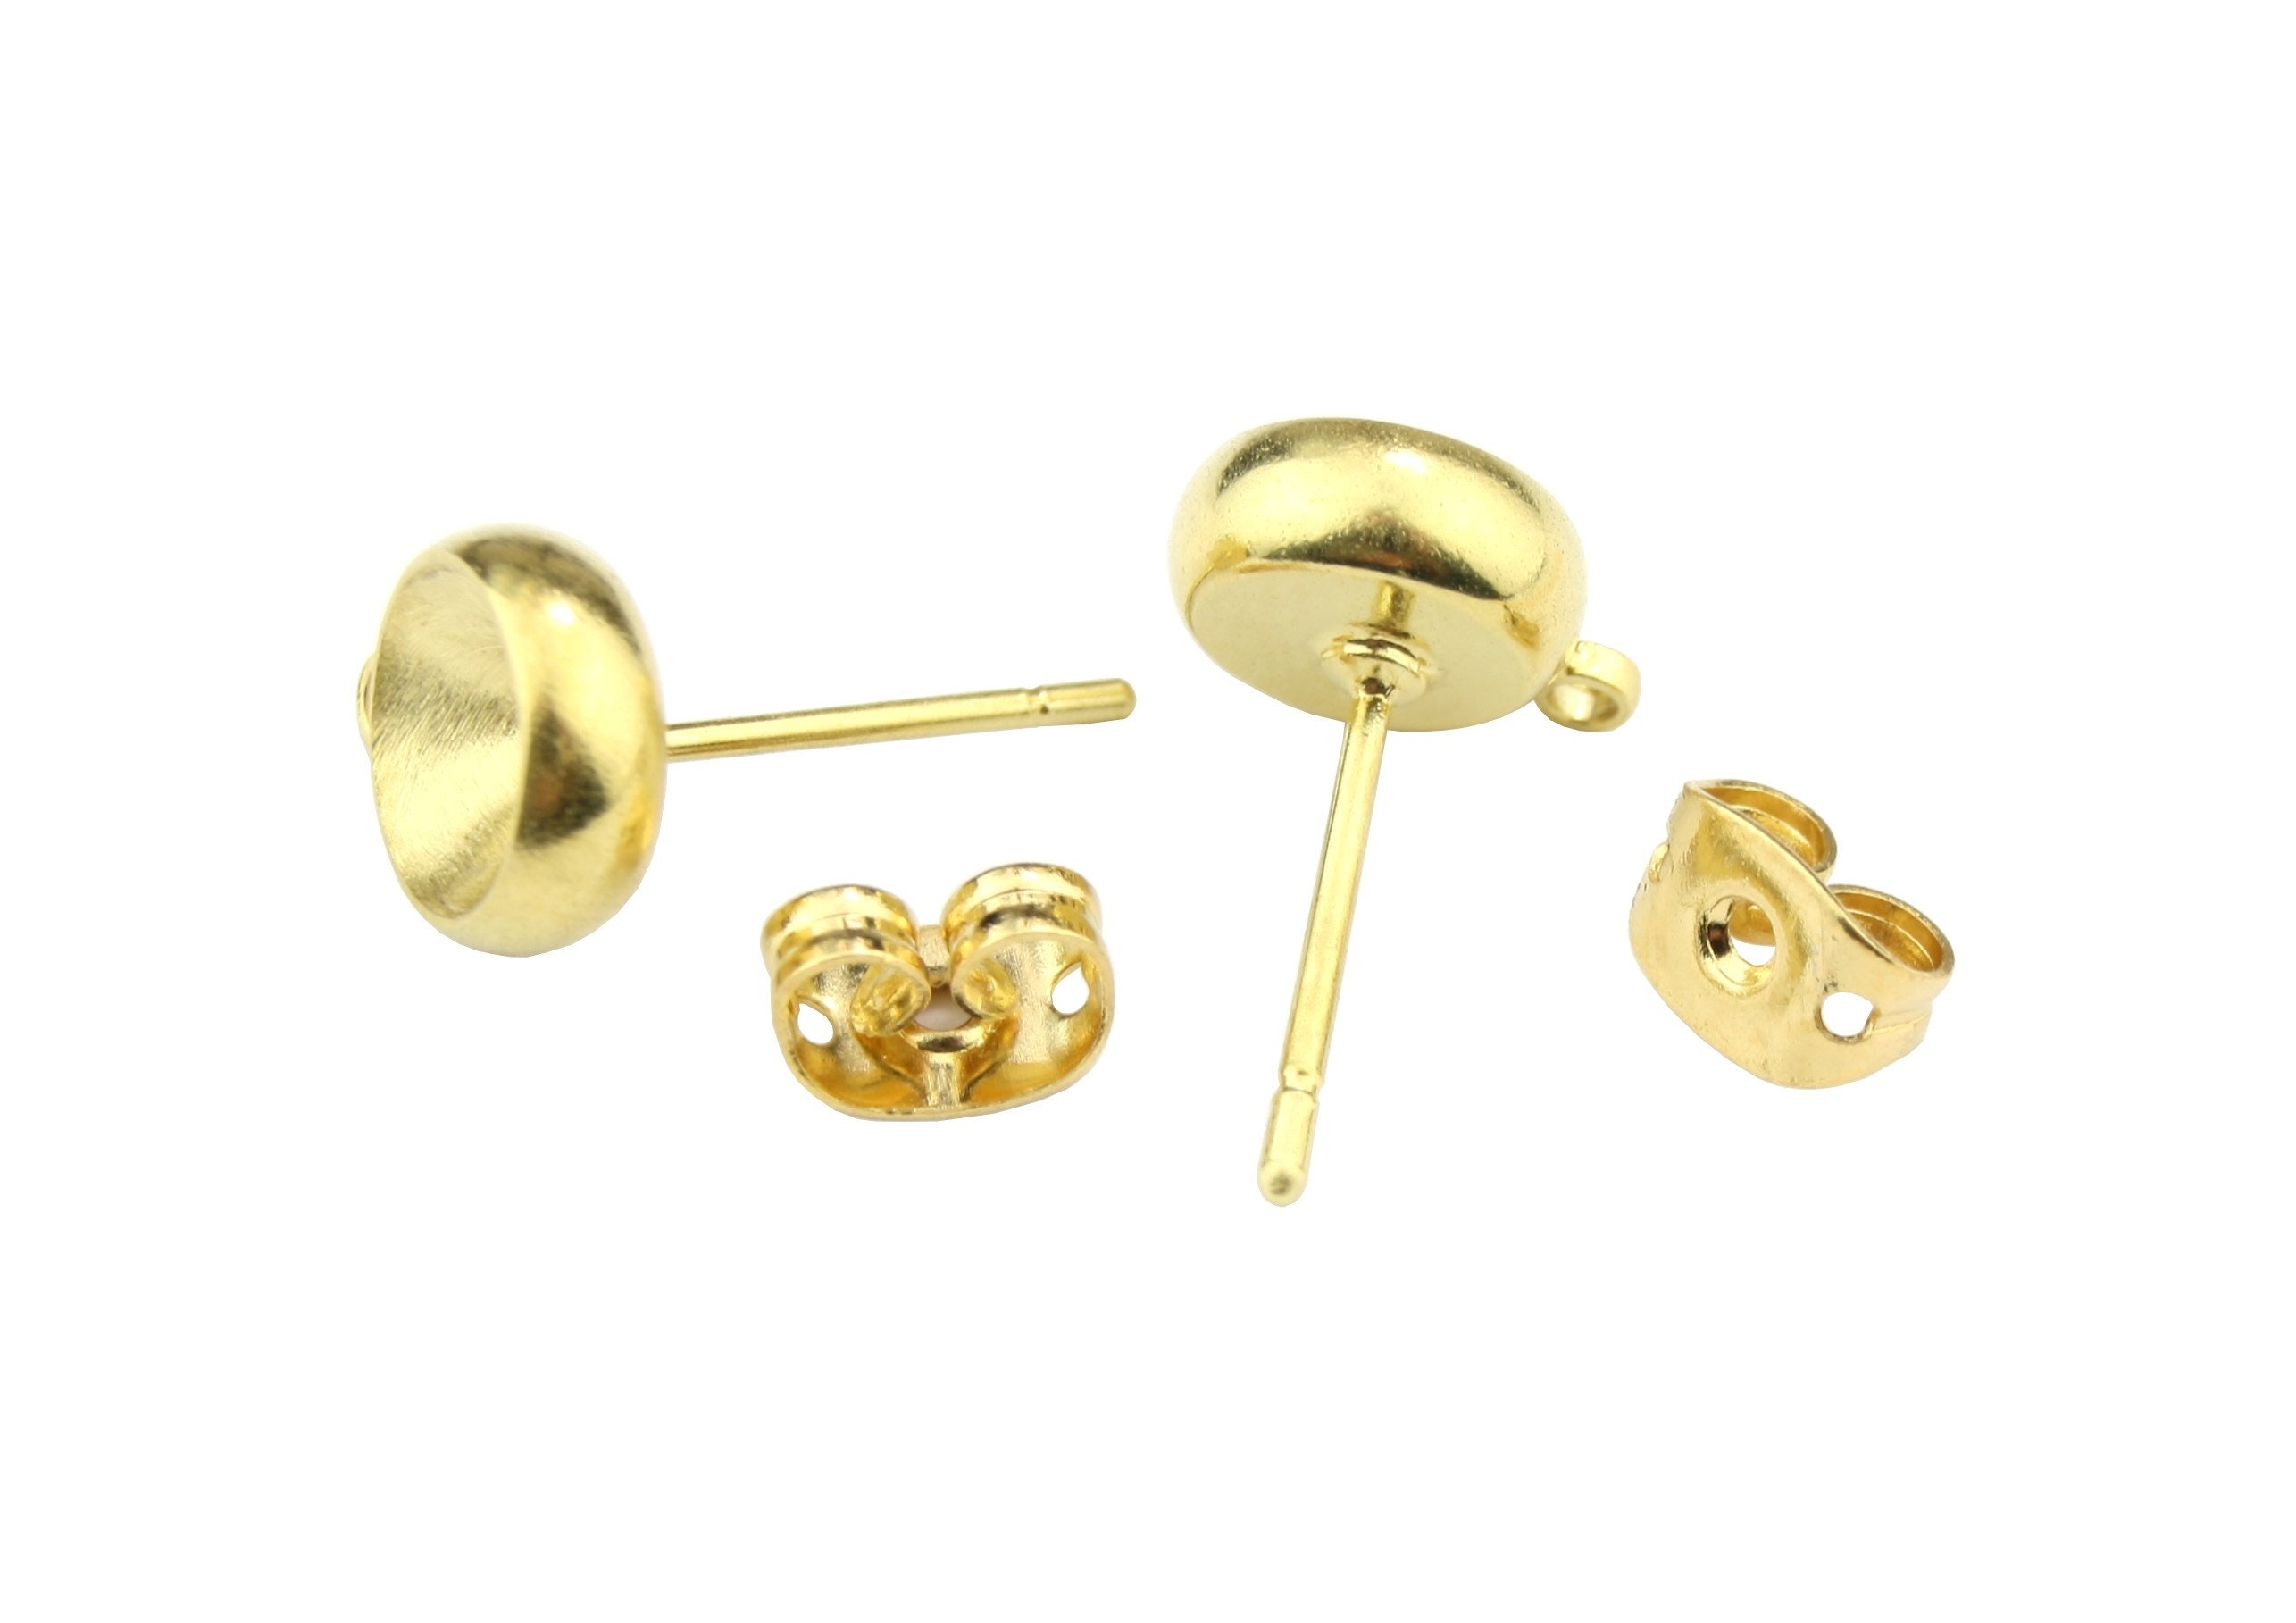 Crafts Haveli Golden Finished Bullet Metal and Silicon Rubber Push Lock  Earring Making Stud for Women and Girls Combo Pack of 25 Pieces   Amazonin Fashion